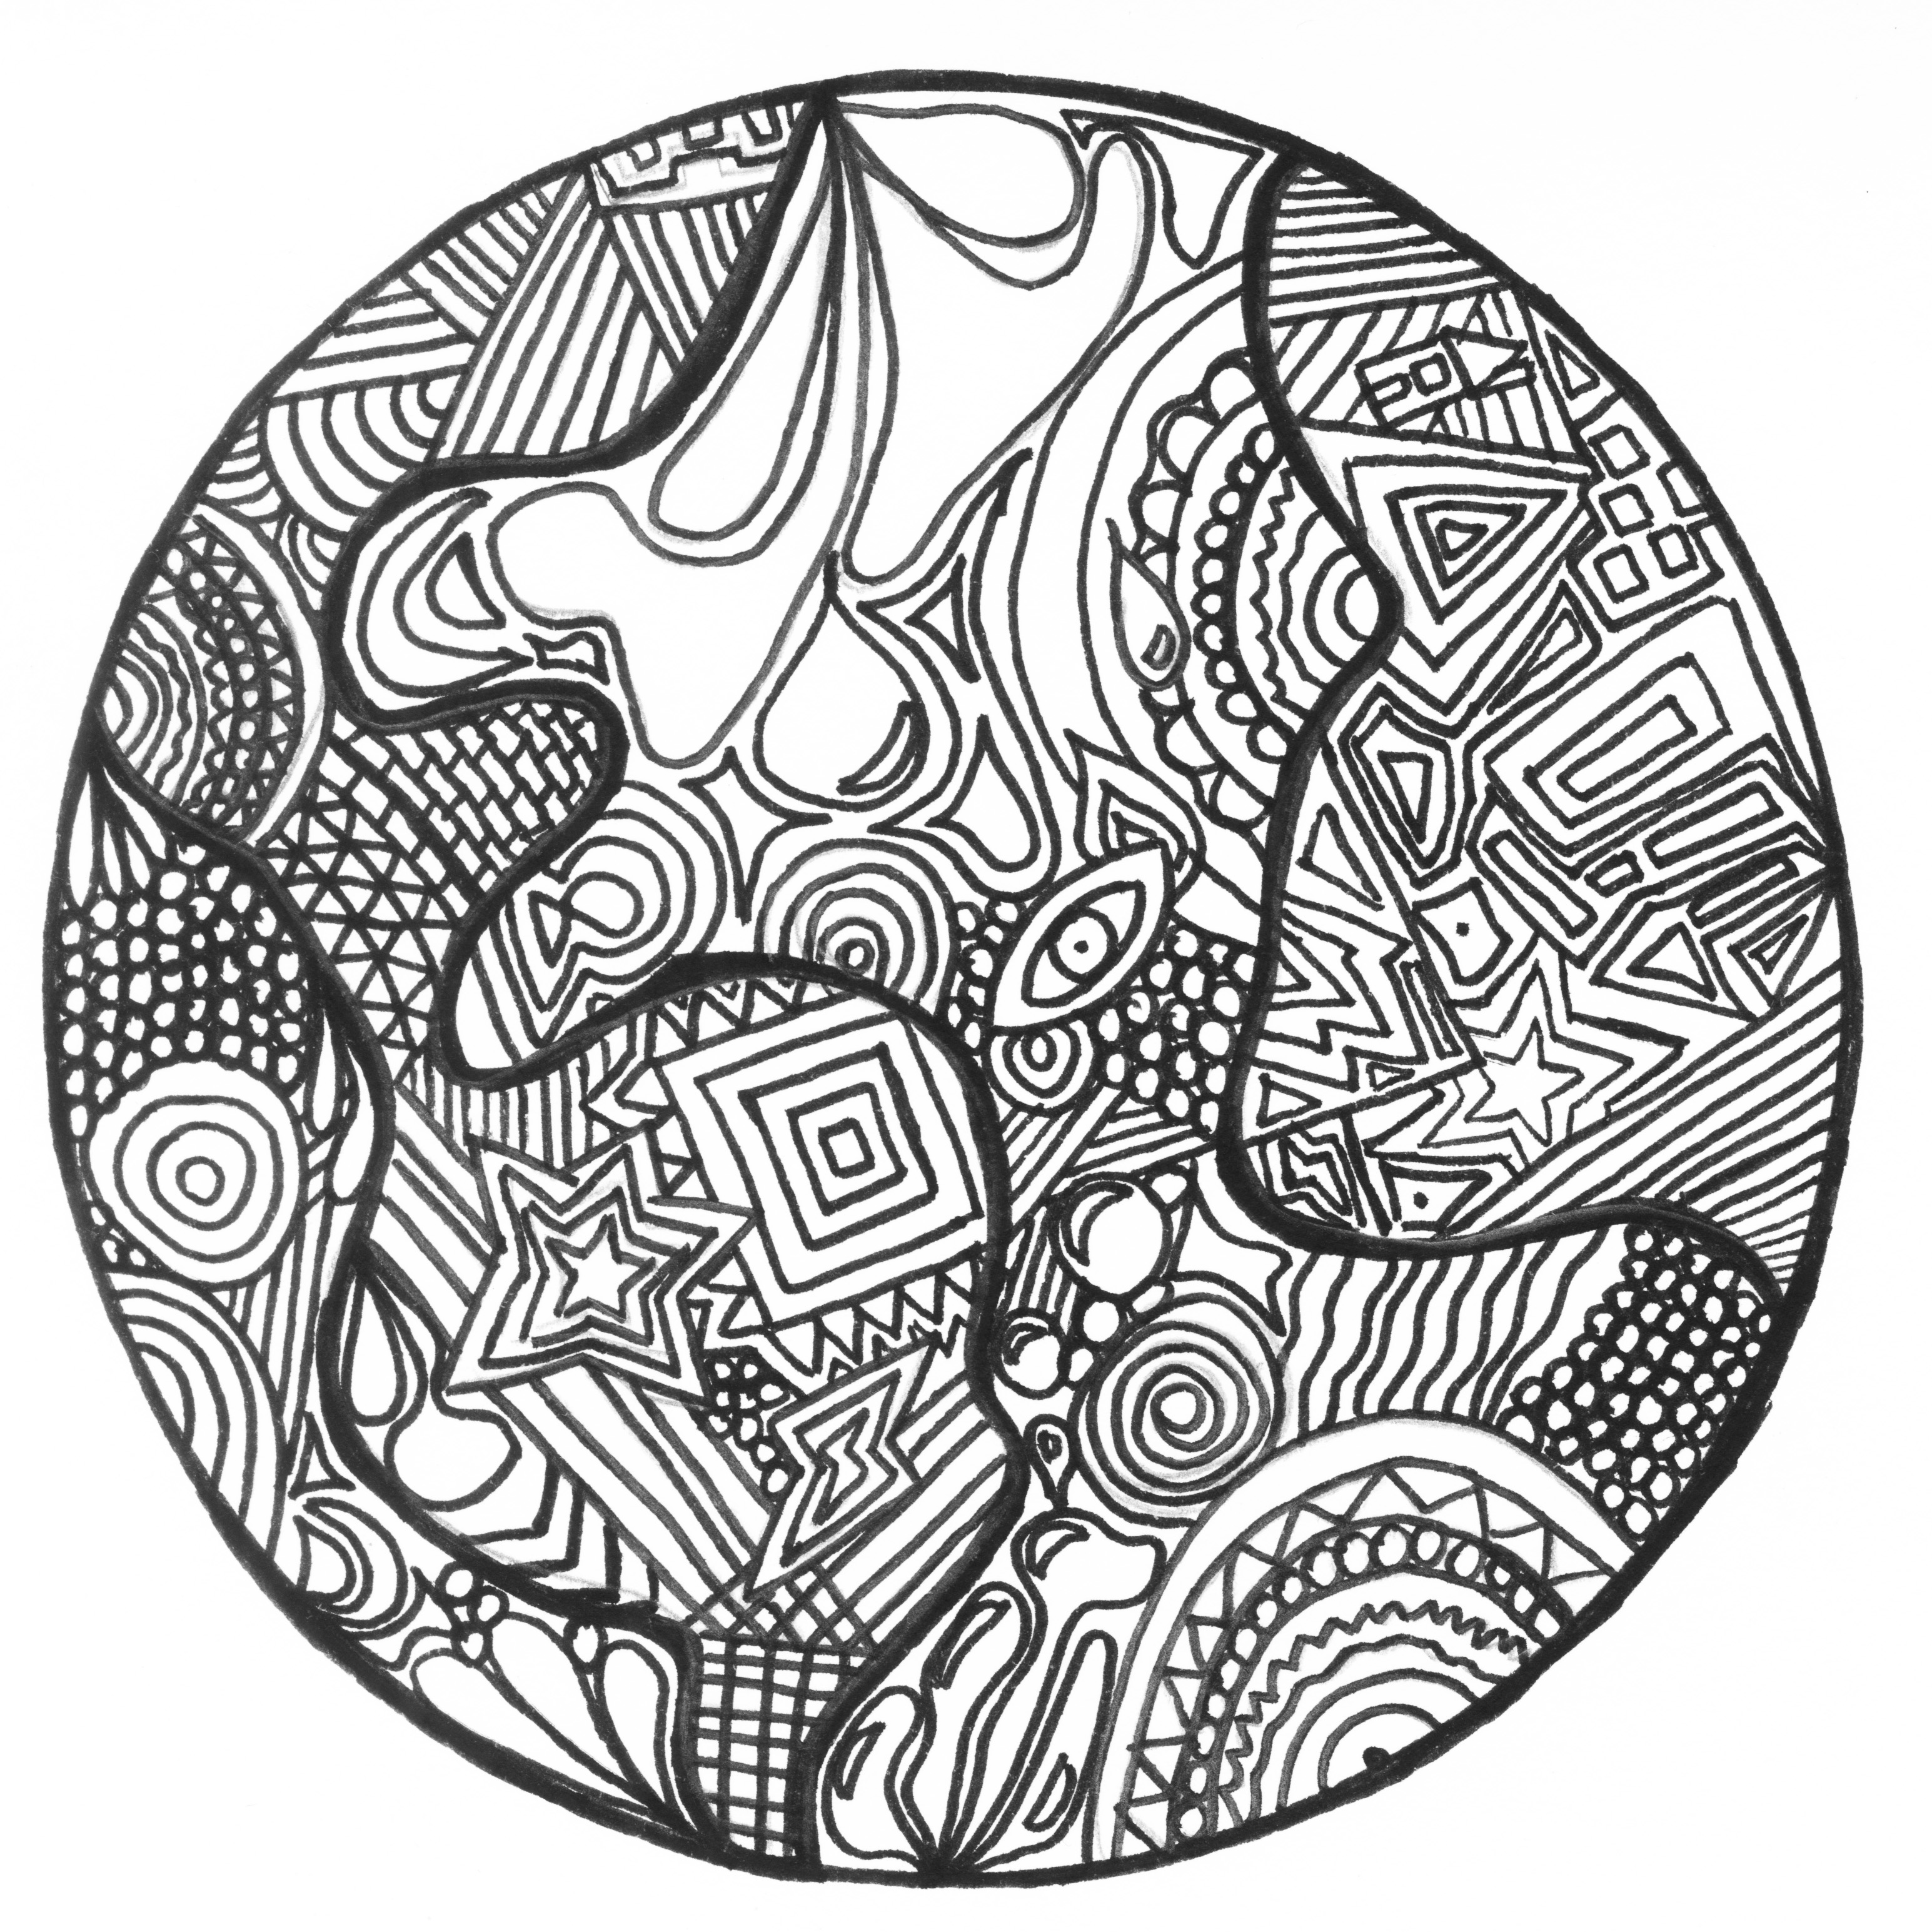 The mix of a planet and the art of Zentangle